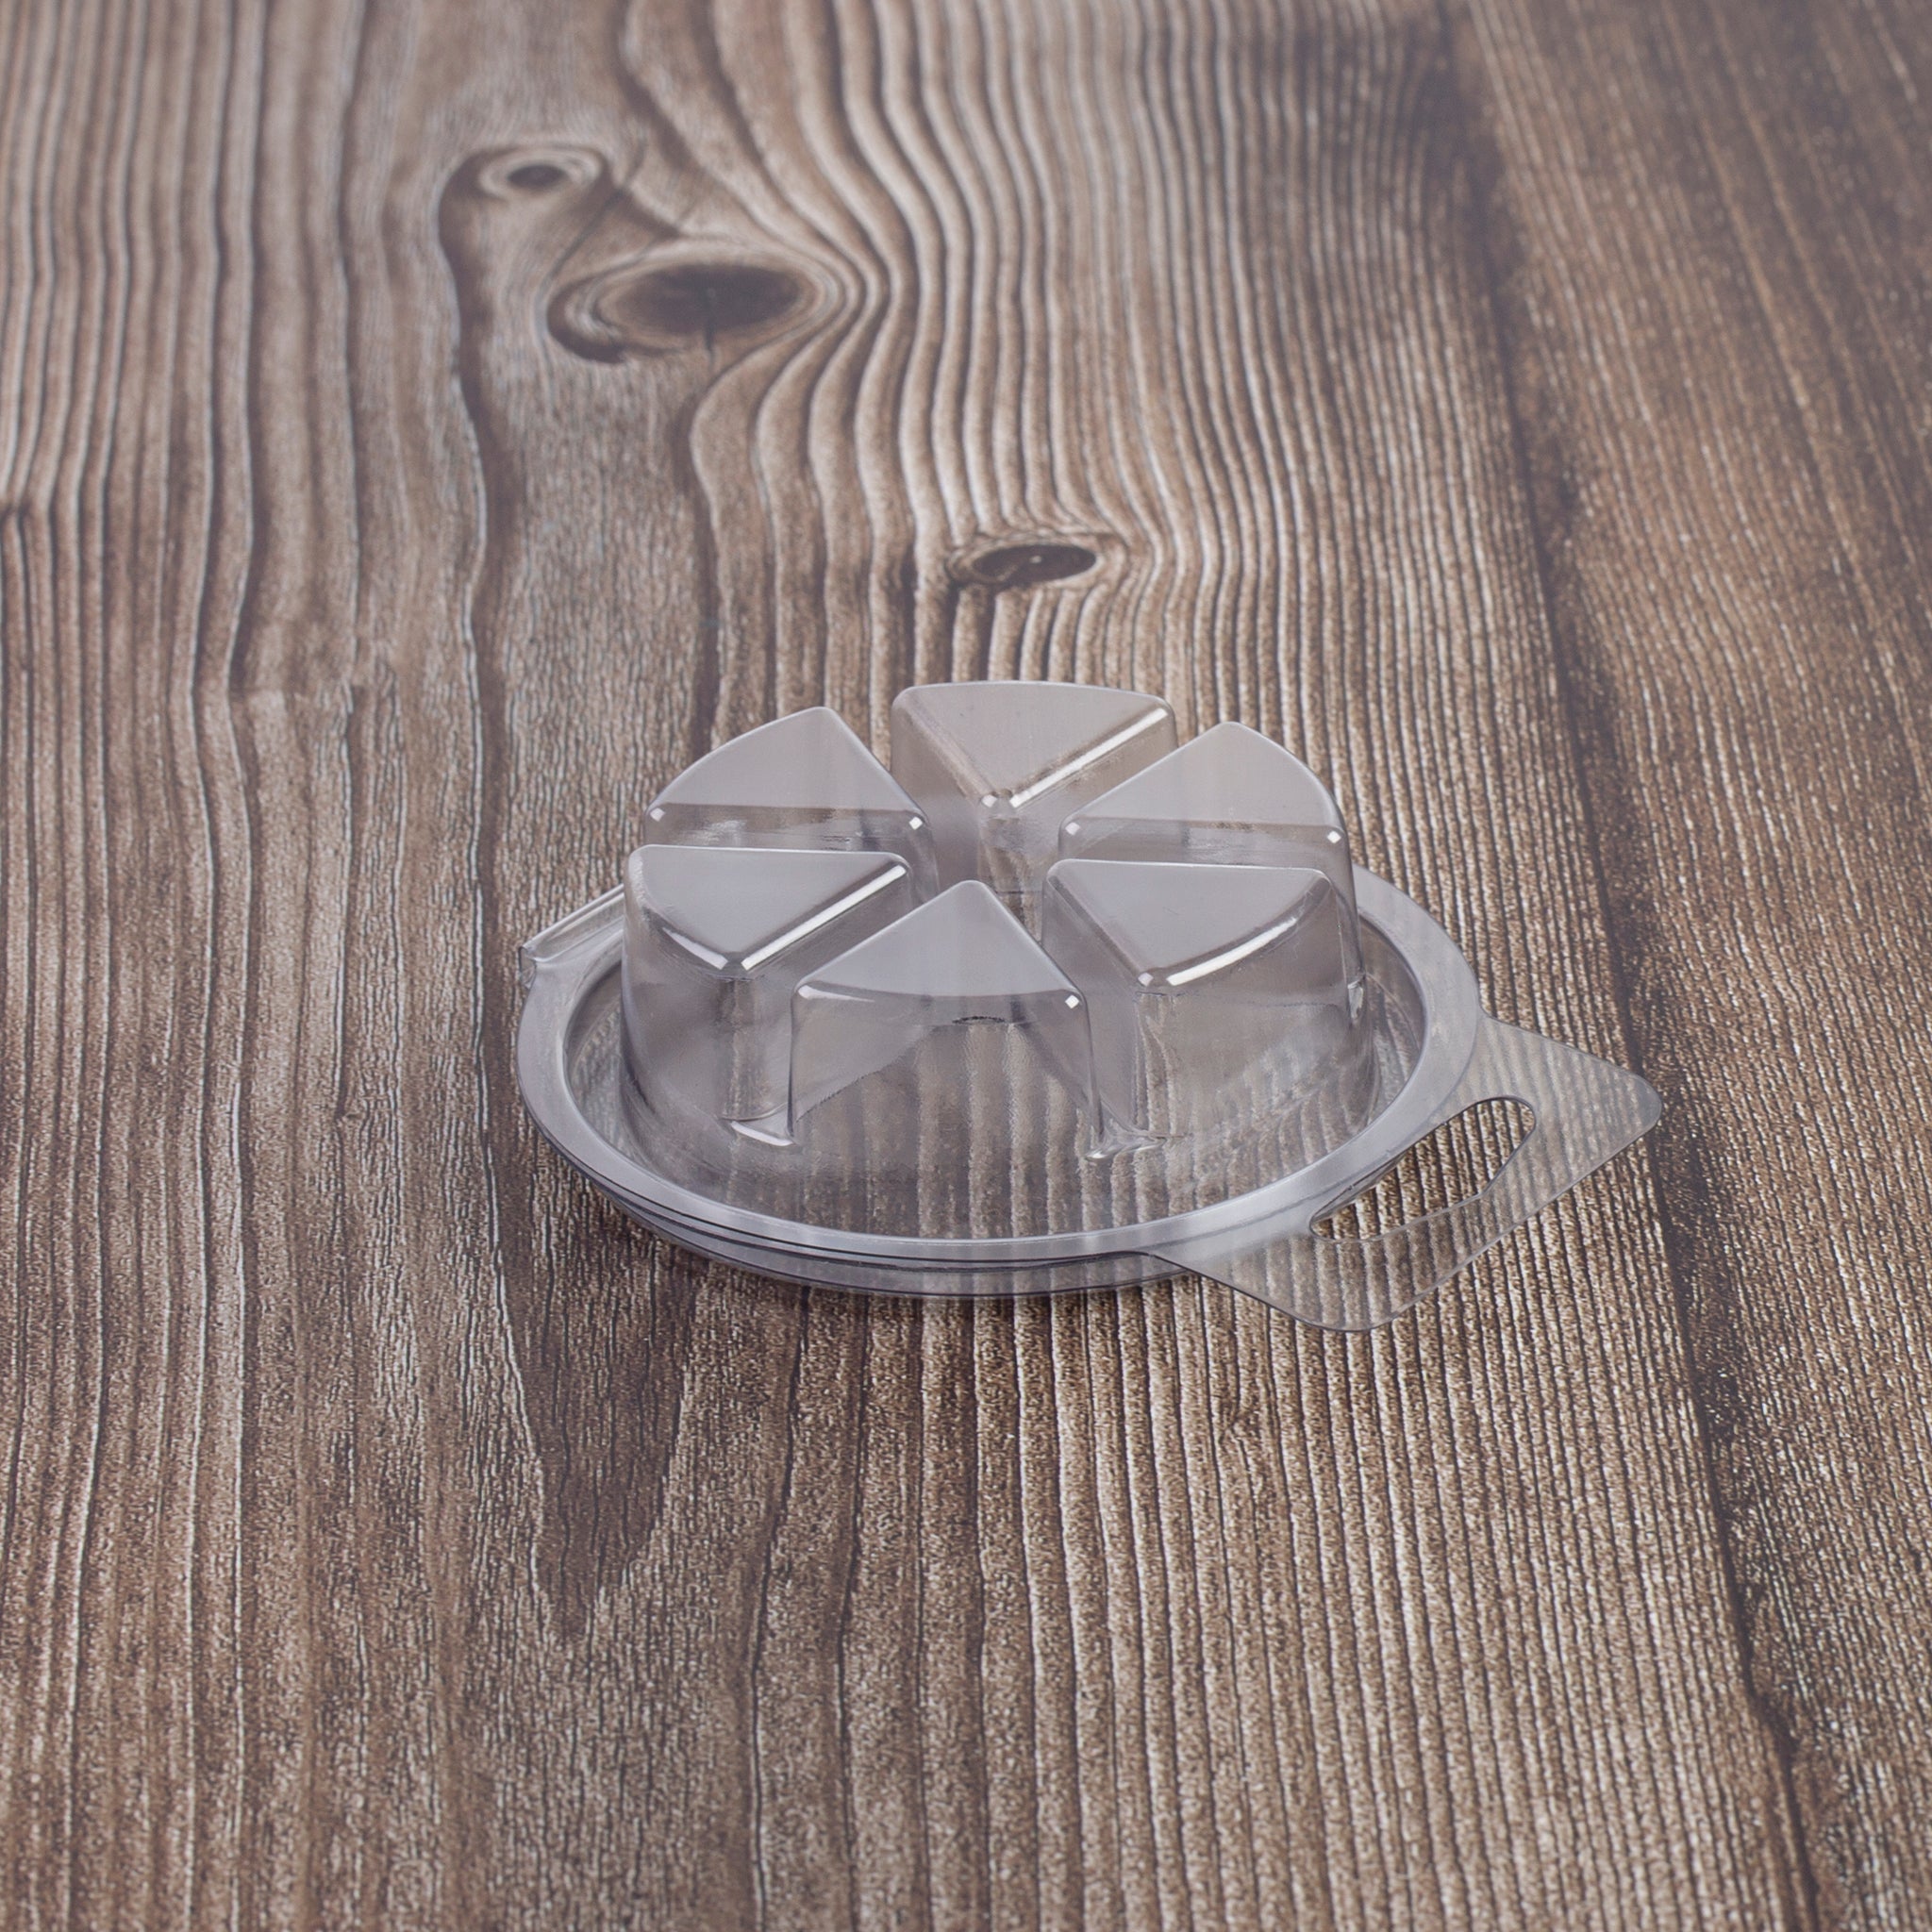 Candle Clamshell Containers - Pie Shaped Tart Mold – NorthWood Distributing